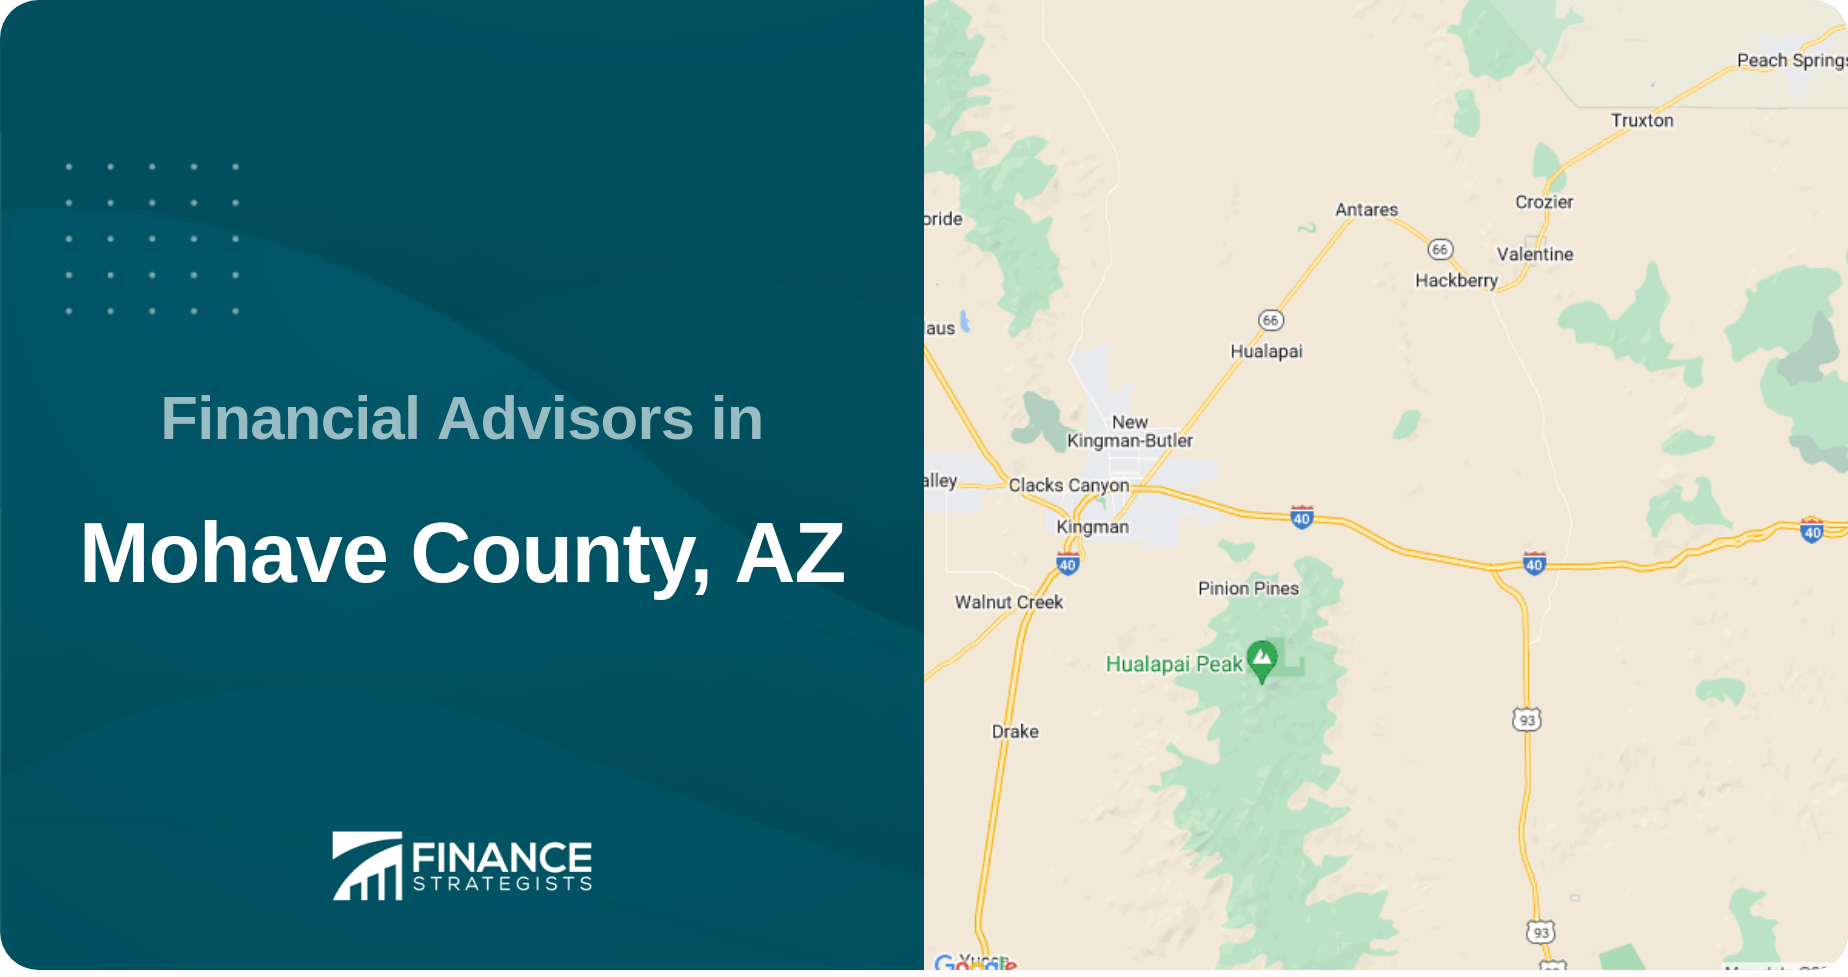 Financial Advisors in Mohave County, AZ